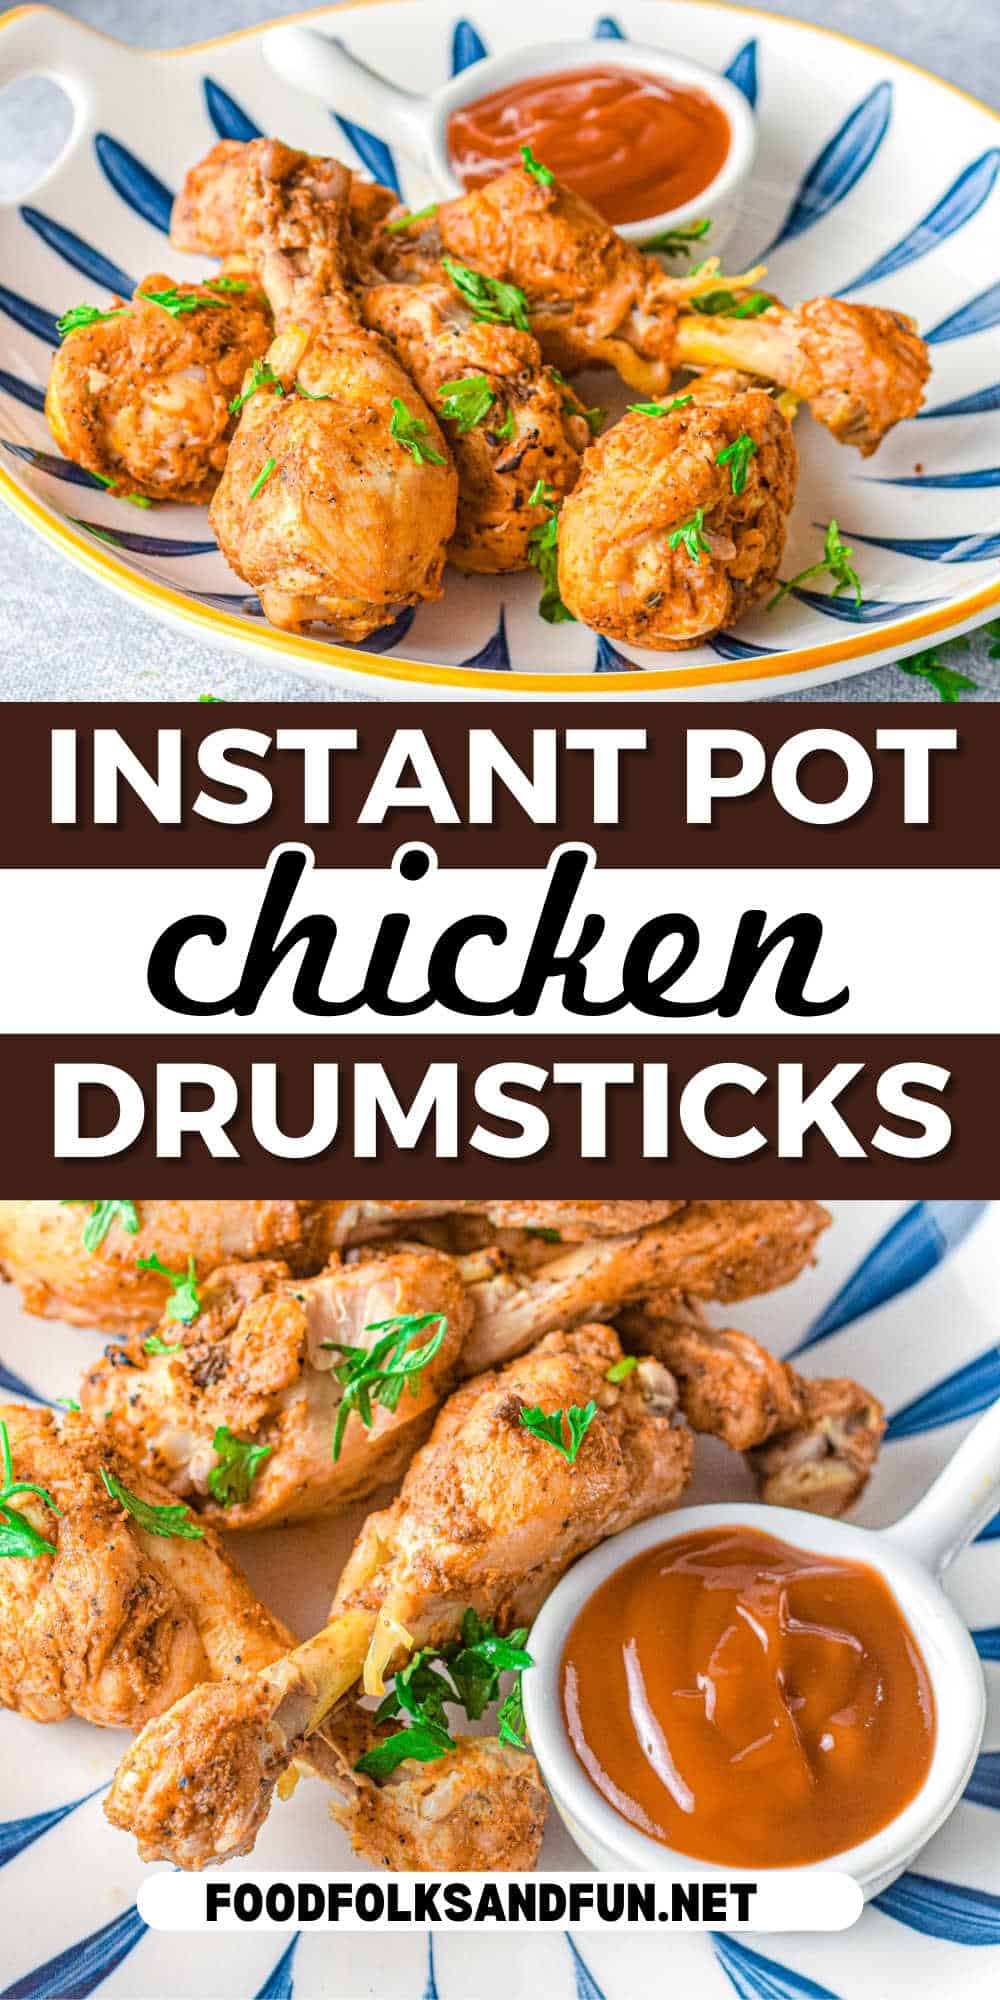 Instant pot chicken drumsticks are so juicy, tender, and made quickly. They’re great for a quick weeknight dinner.  via @foodfolksandfun